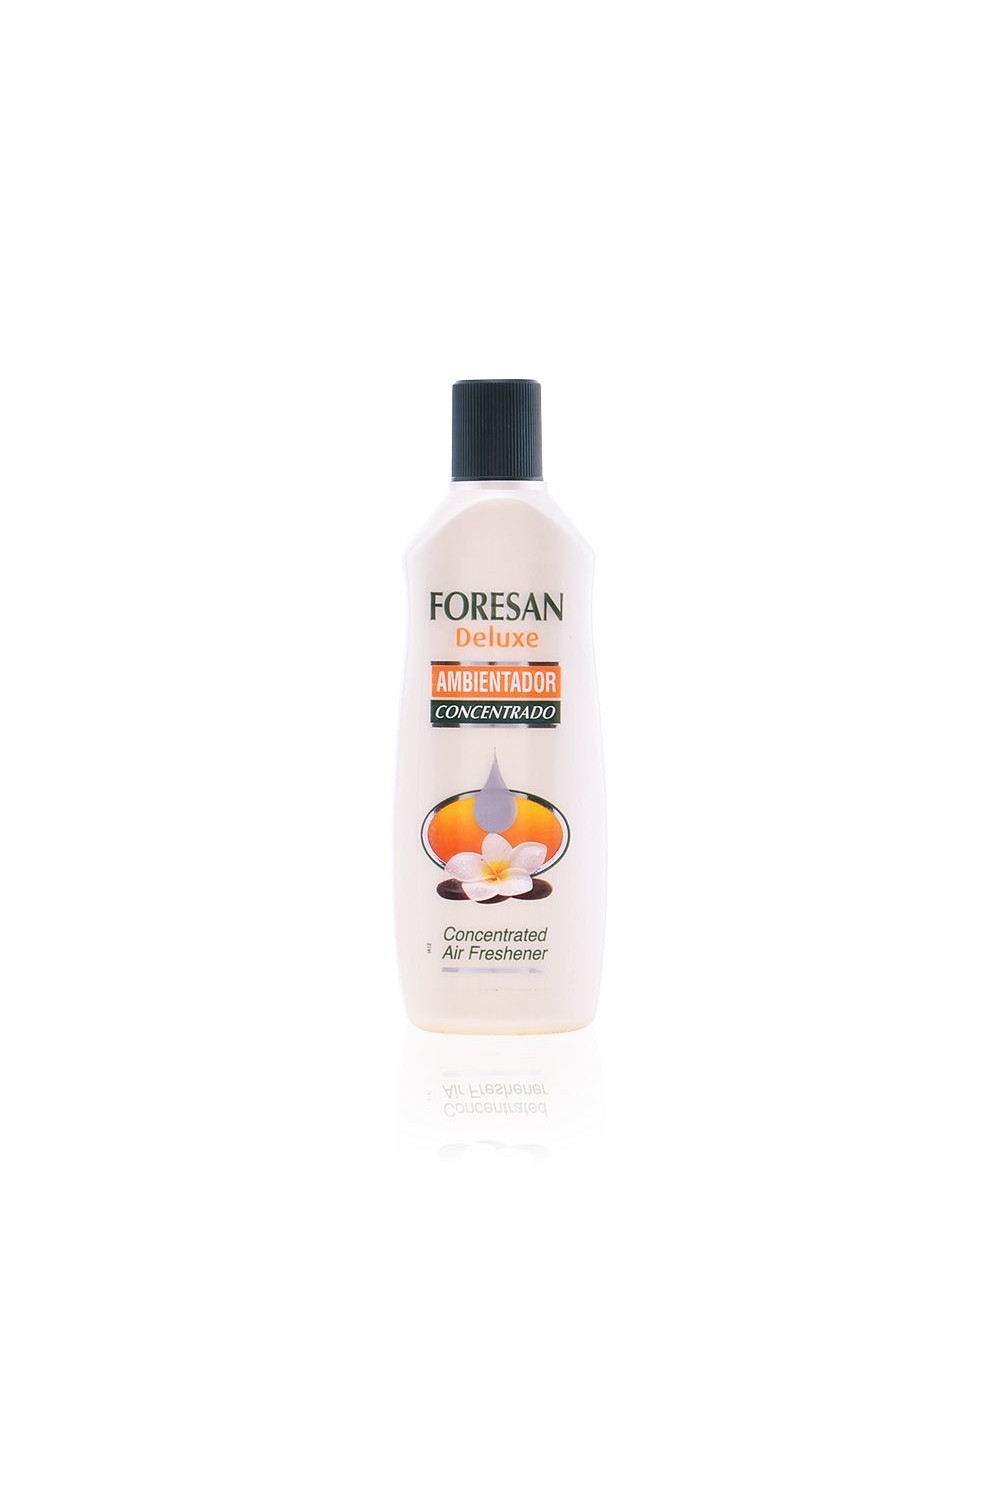 Foresan Deluxe Concentrated Air Freshener 125ml